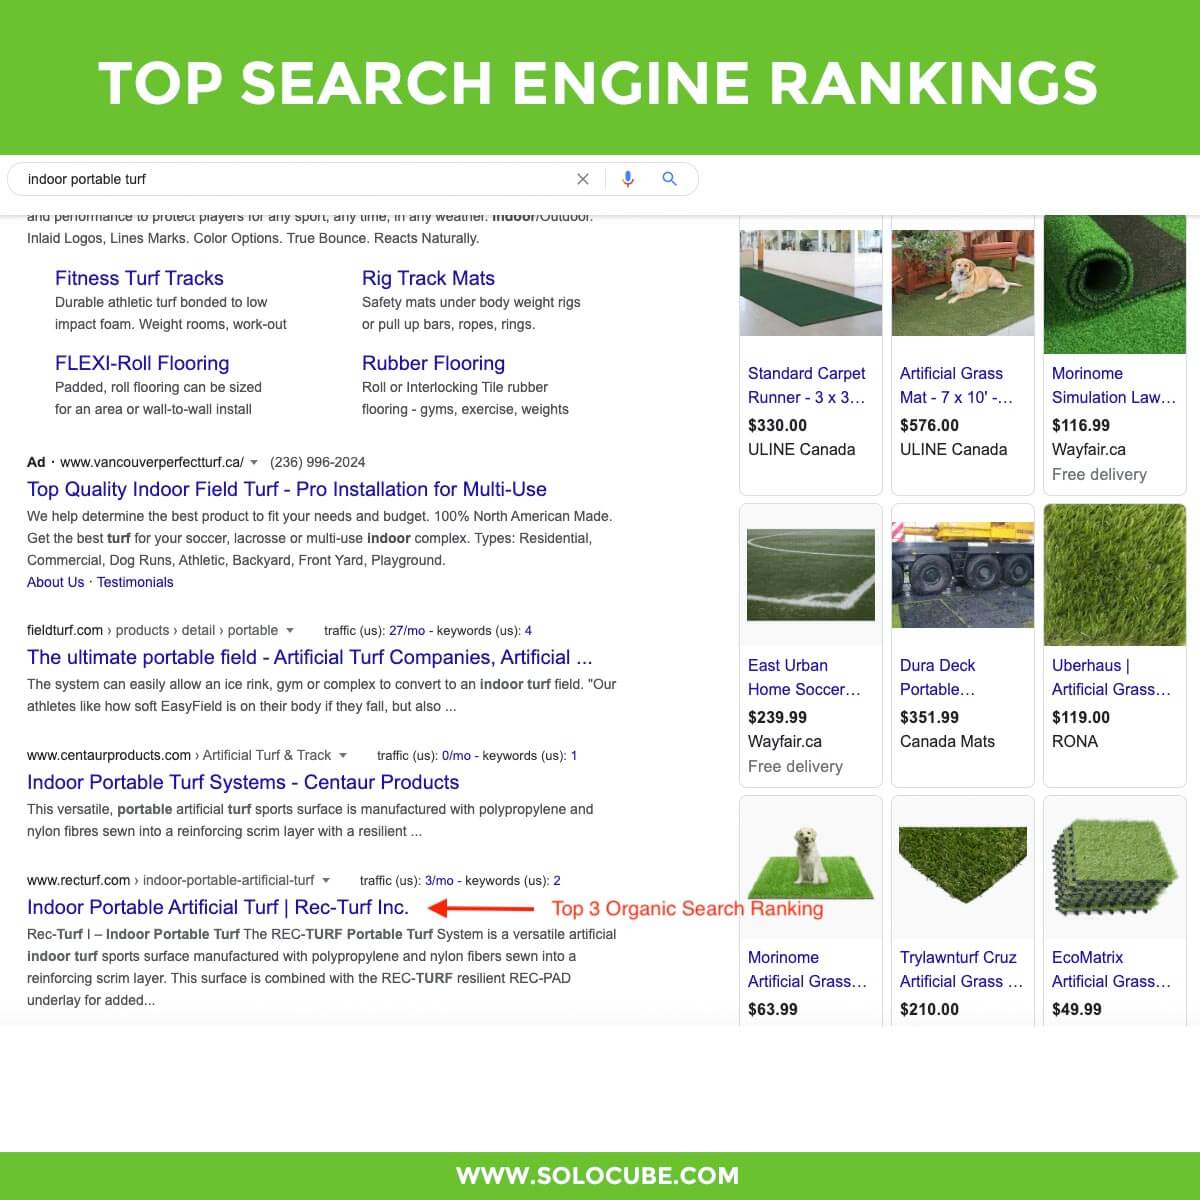 top SEO google ranking by solocube 04 - Chiropractor SEO